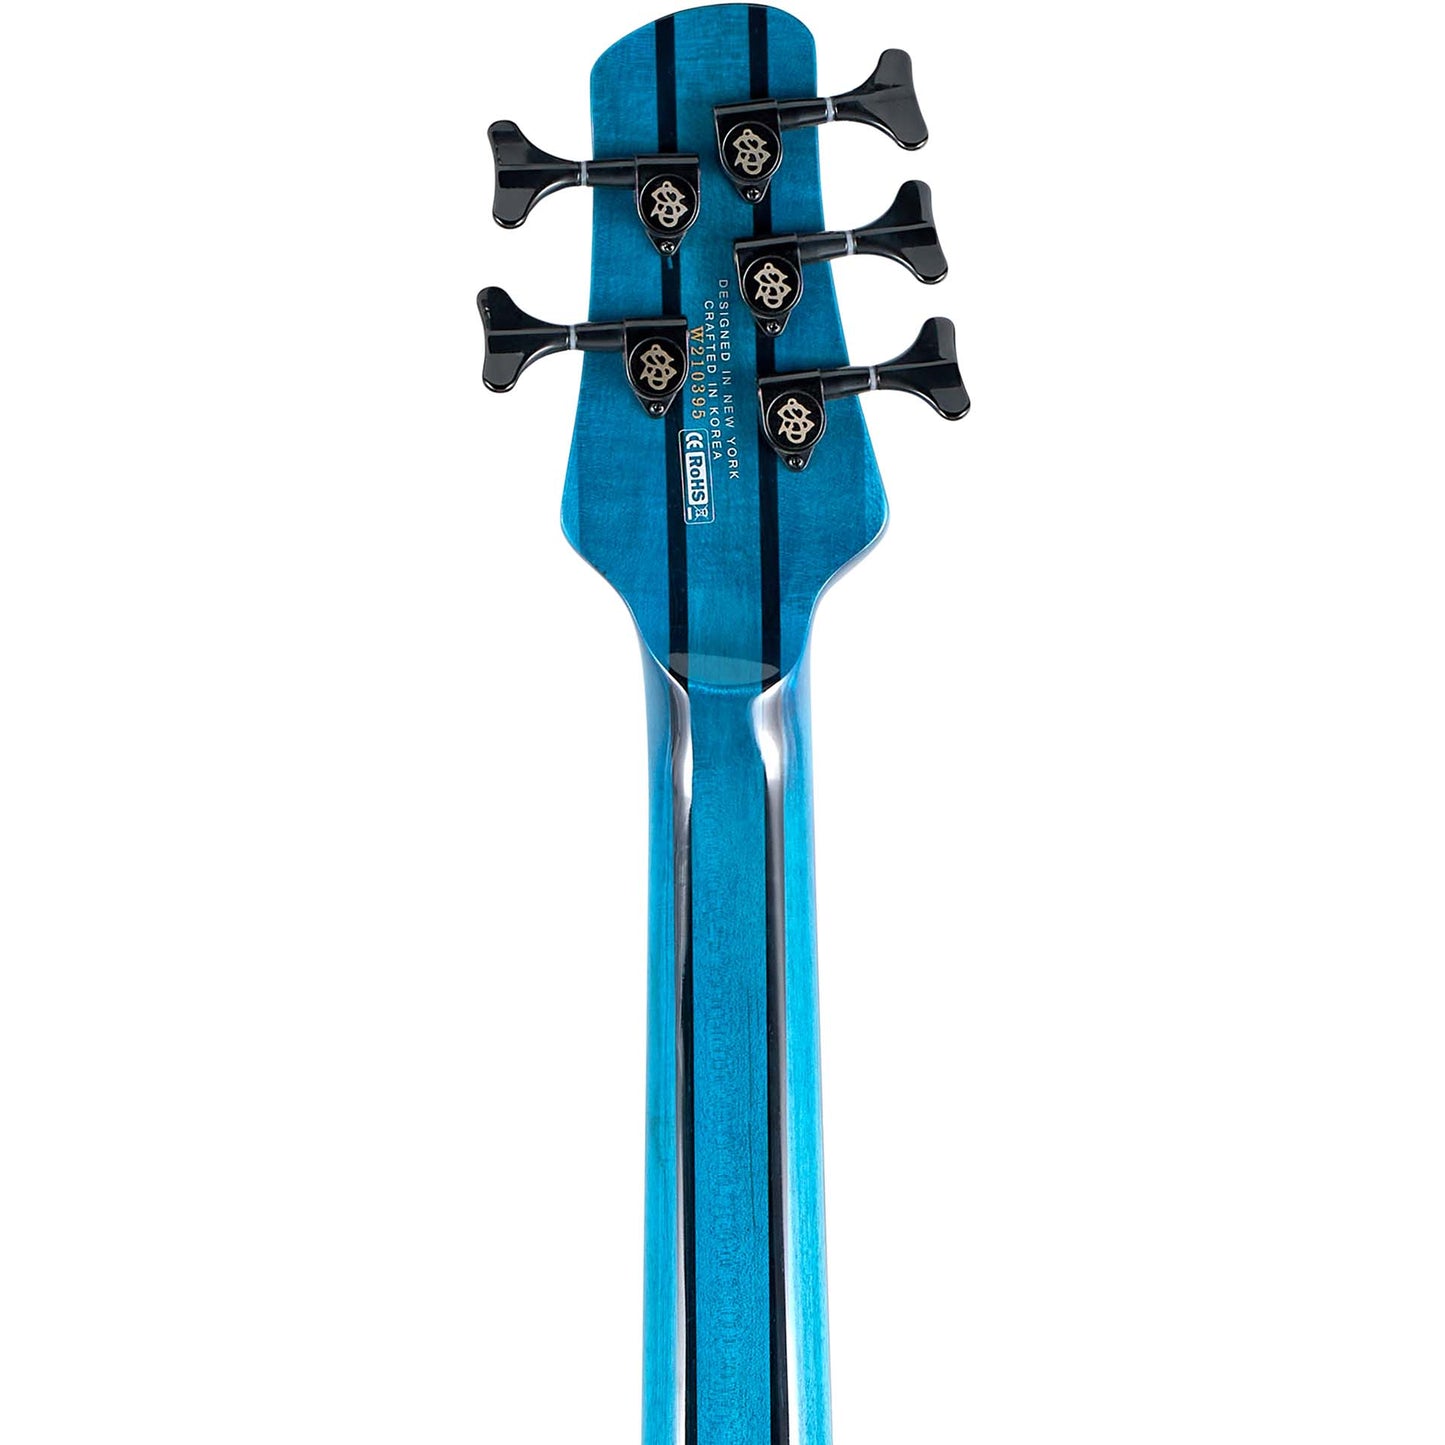 Spector NS Dimension 5 Electric Bass in Black & Blue